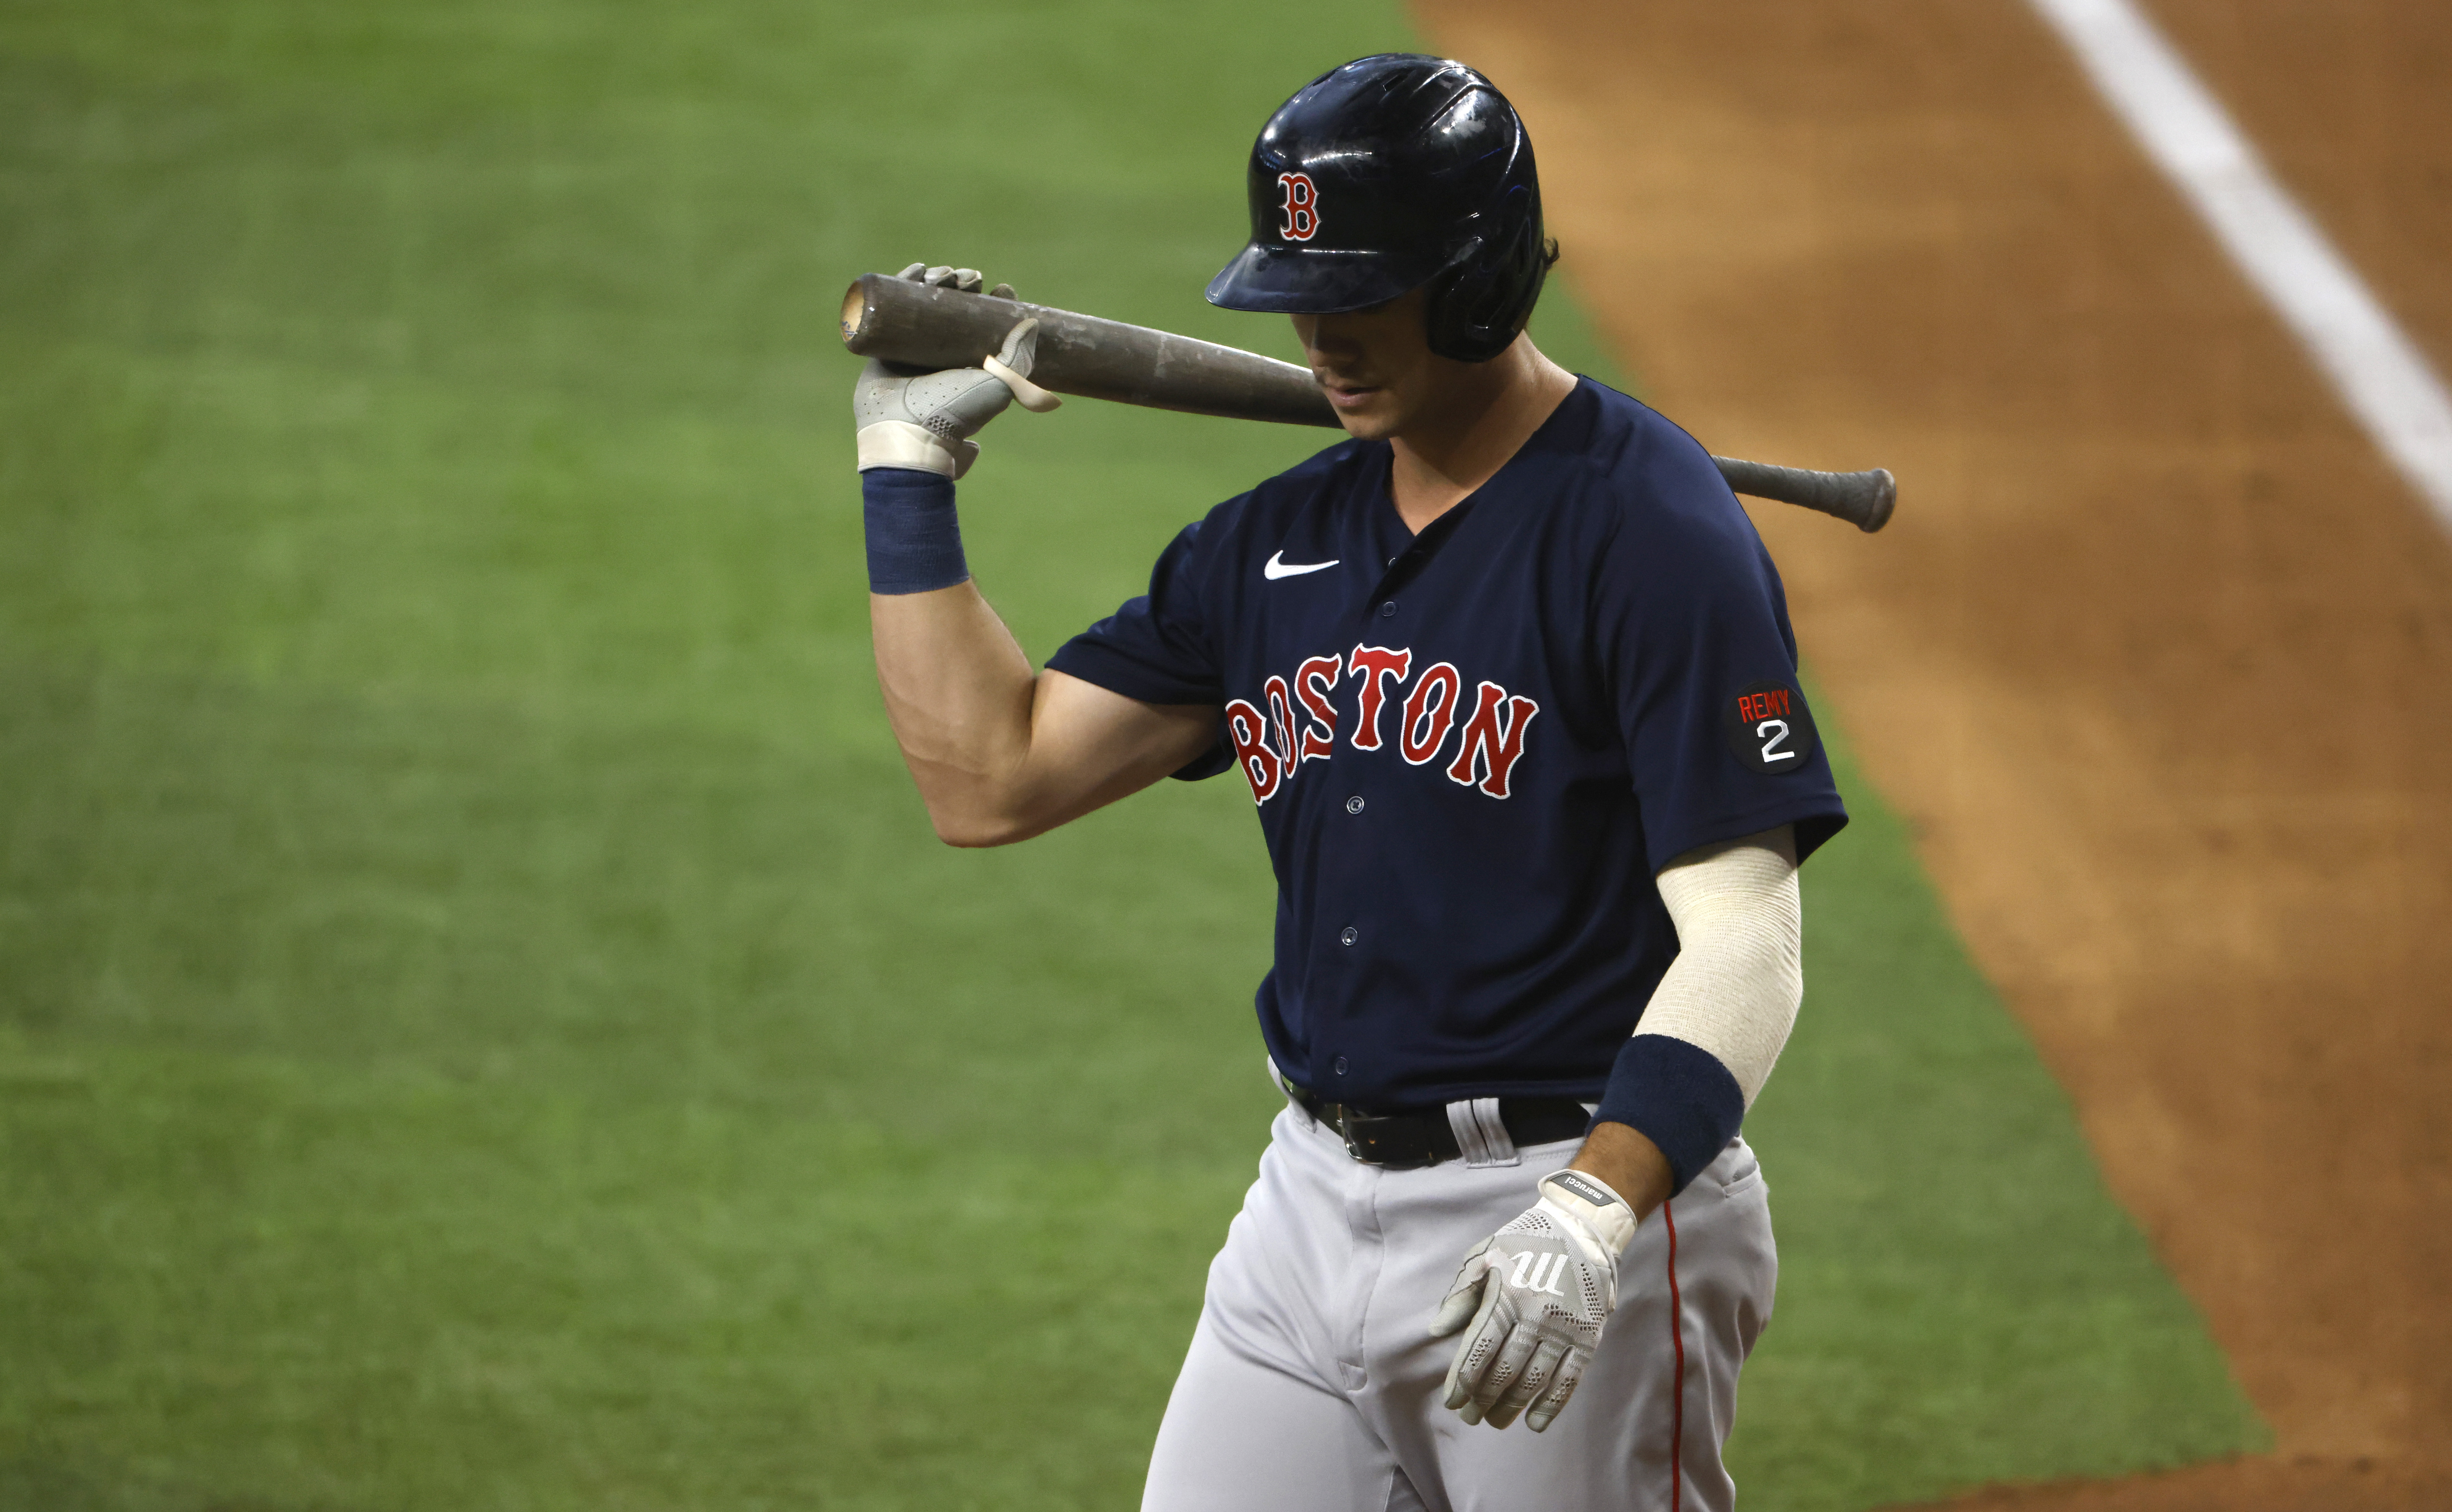 The Red Sox aren't getting much offense from their first basemen,  especially Bobby Dalbec - The Boston Globe